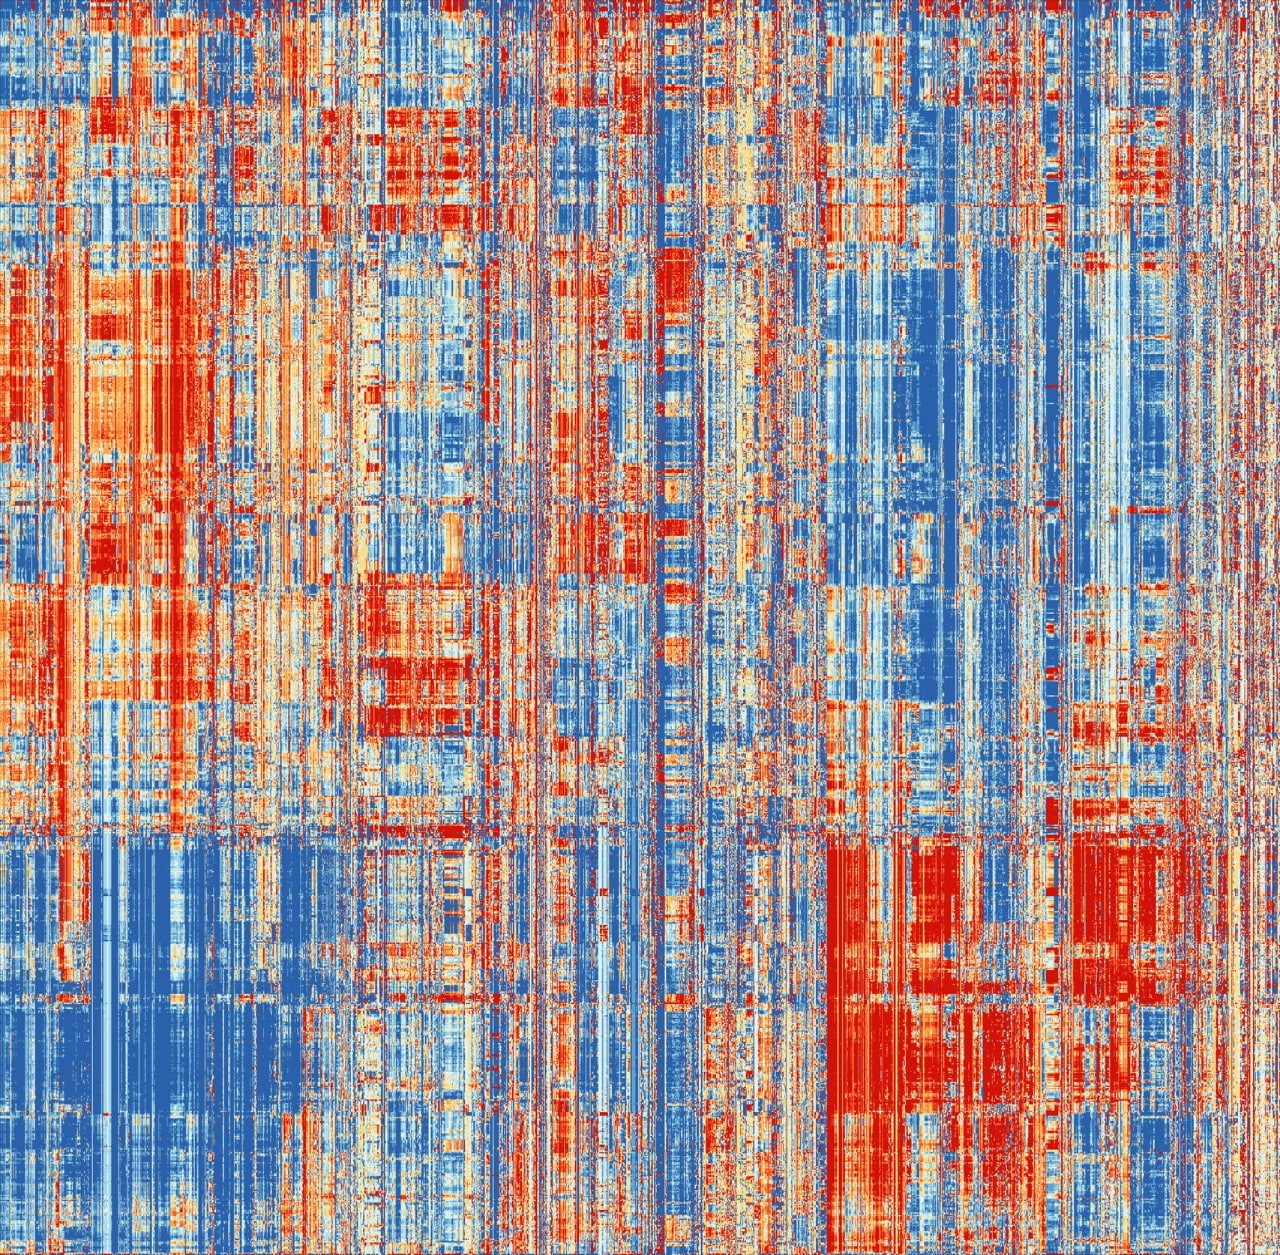 Vertical lines of red and blue, in an uneven distrbution representing different signals